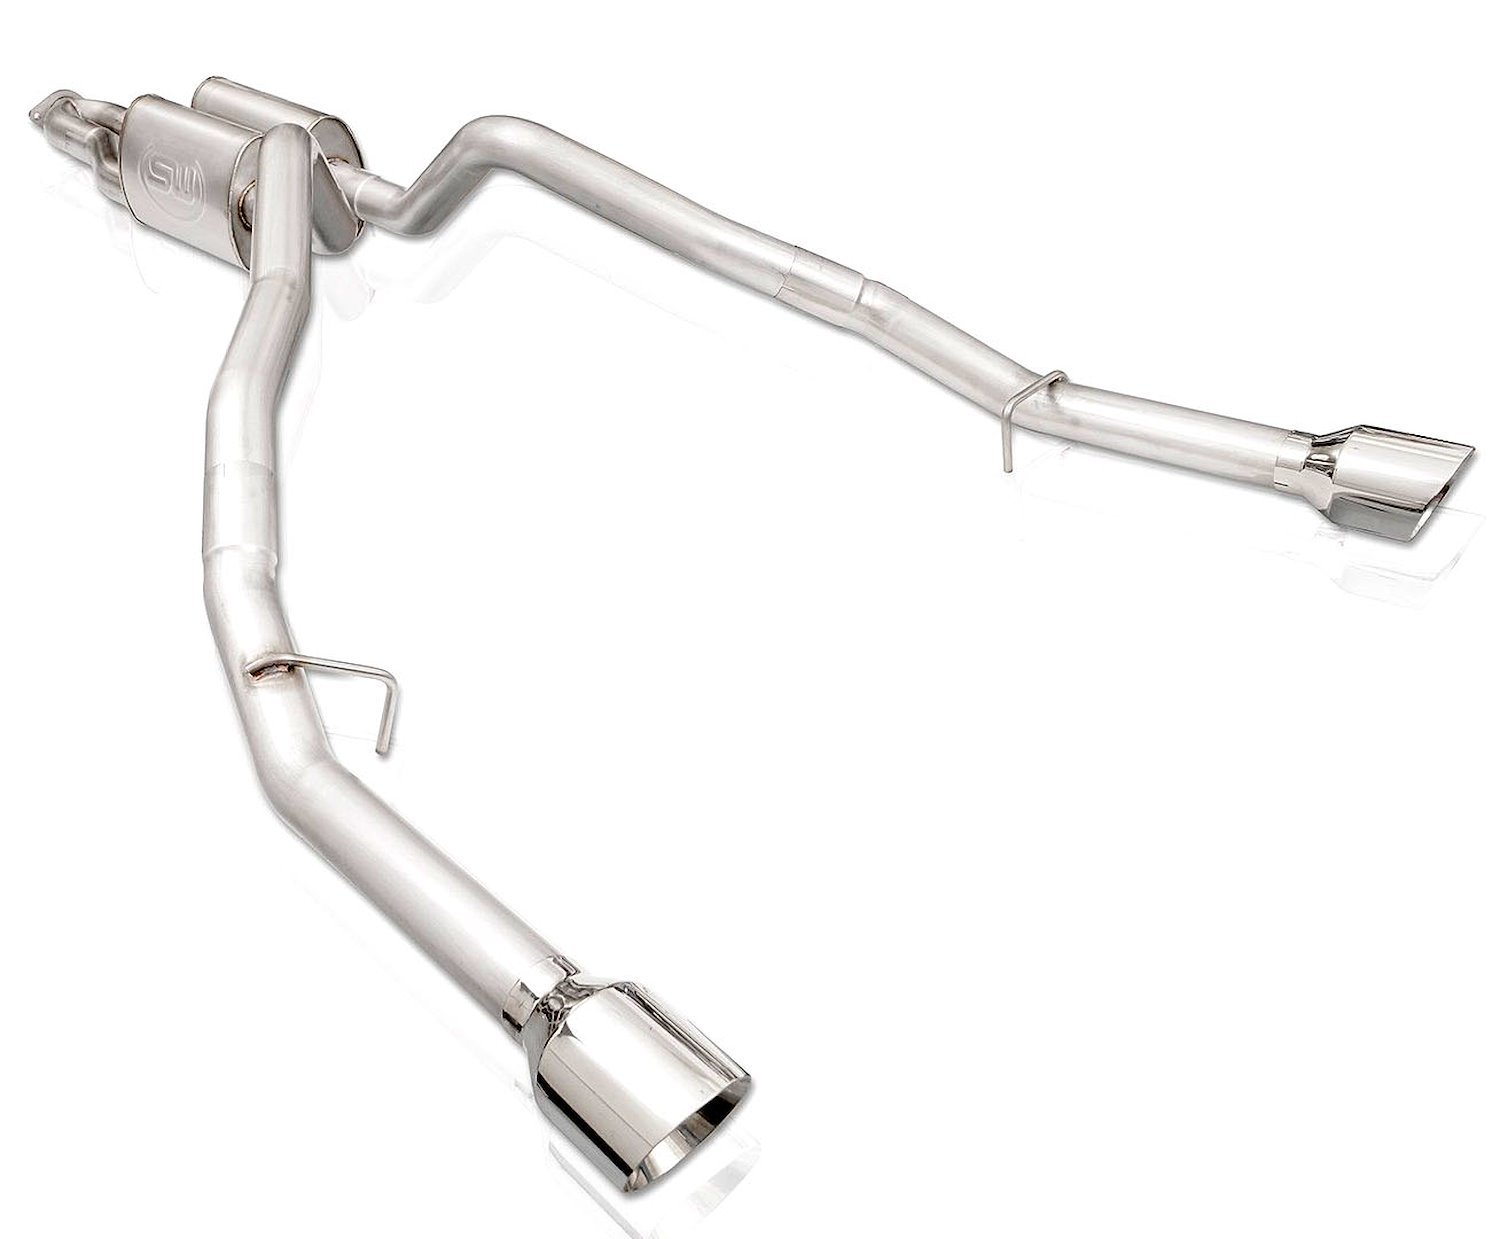 Legend Series Cat-Back Exhaust System with Y & X-Pipe Dodge Ram 1500 5.7L - 5 in. Polished Tips - Distinctive Growl/Rumble